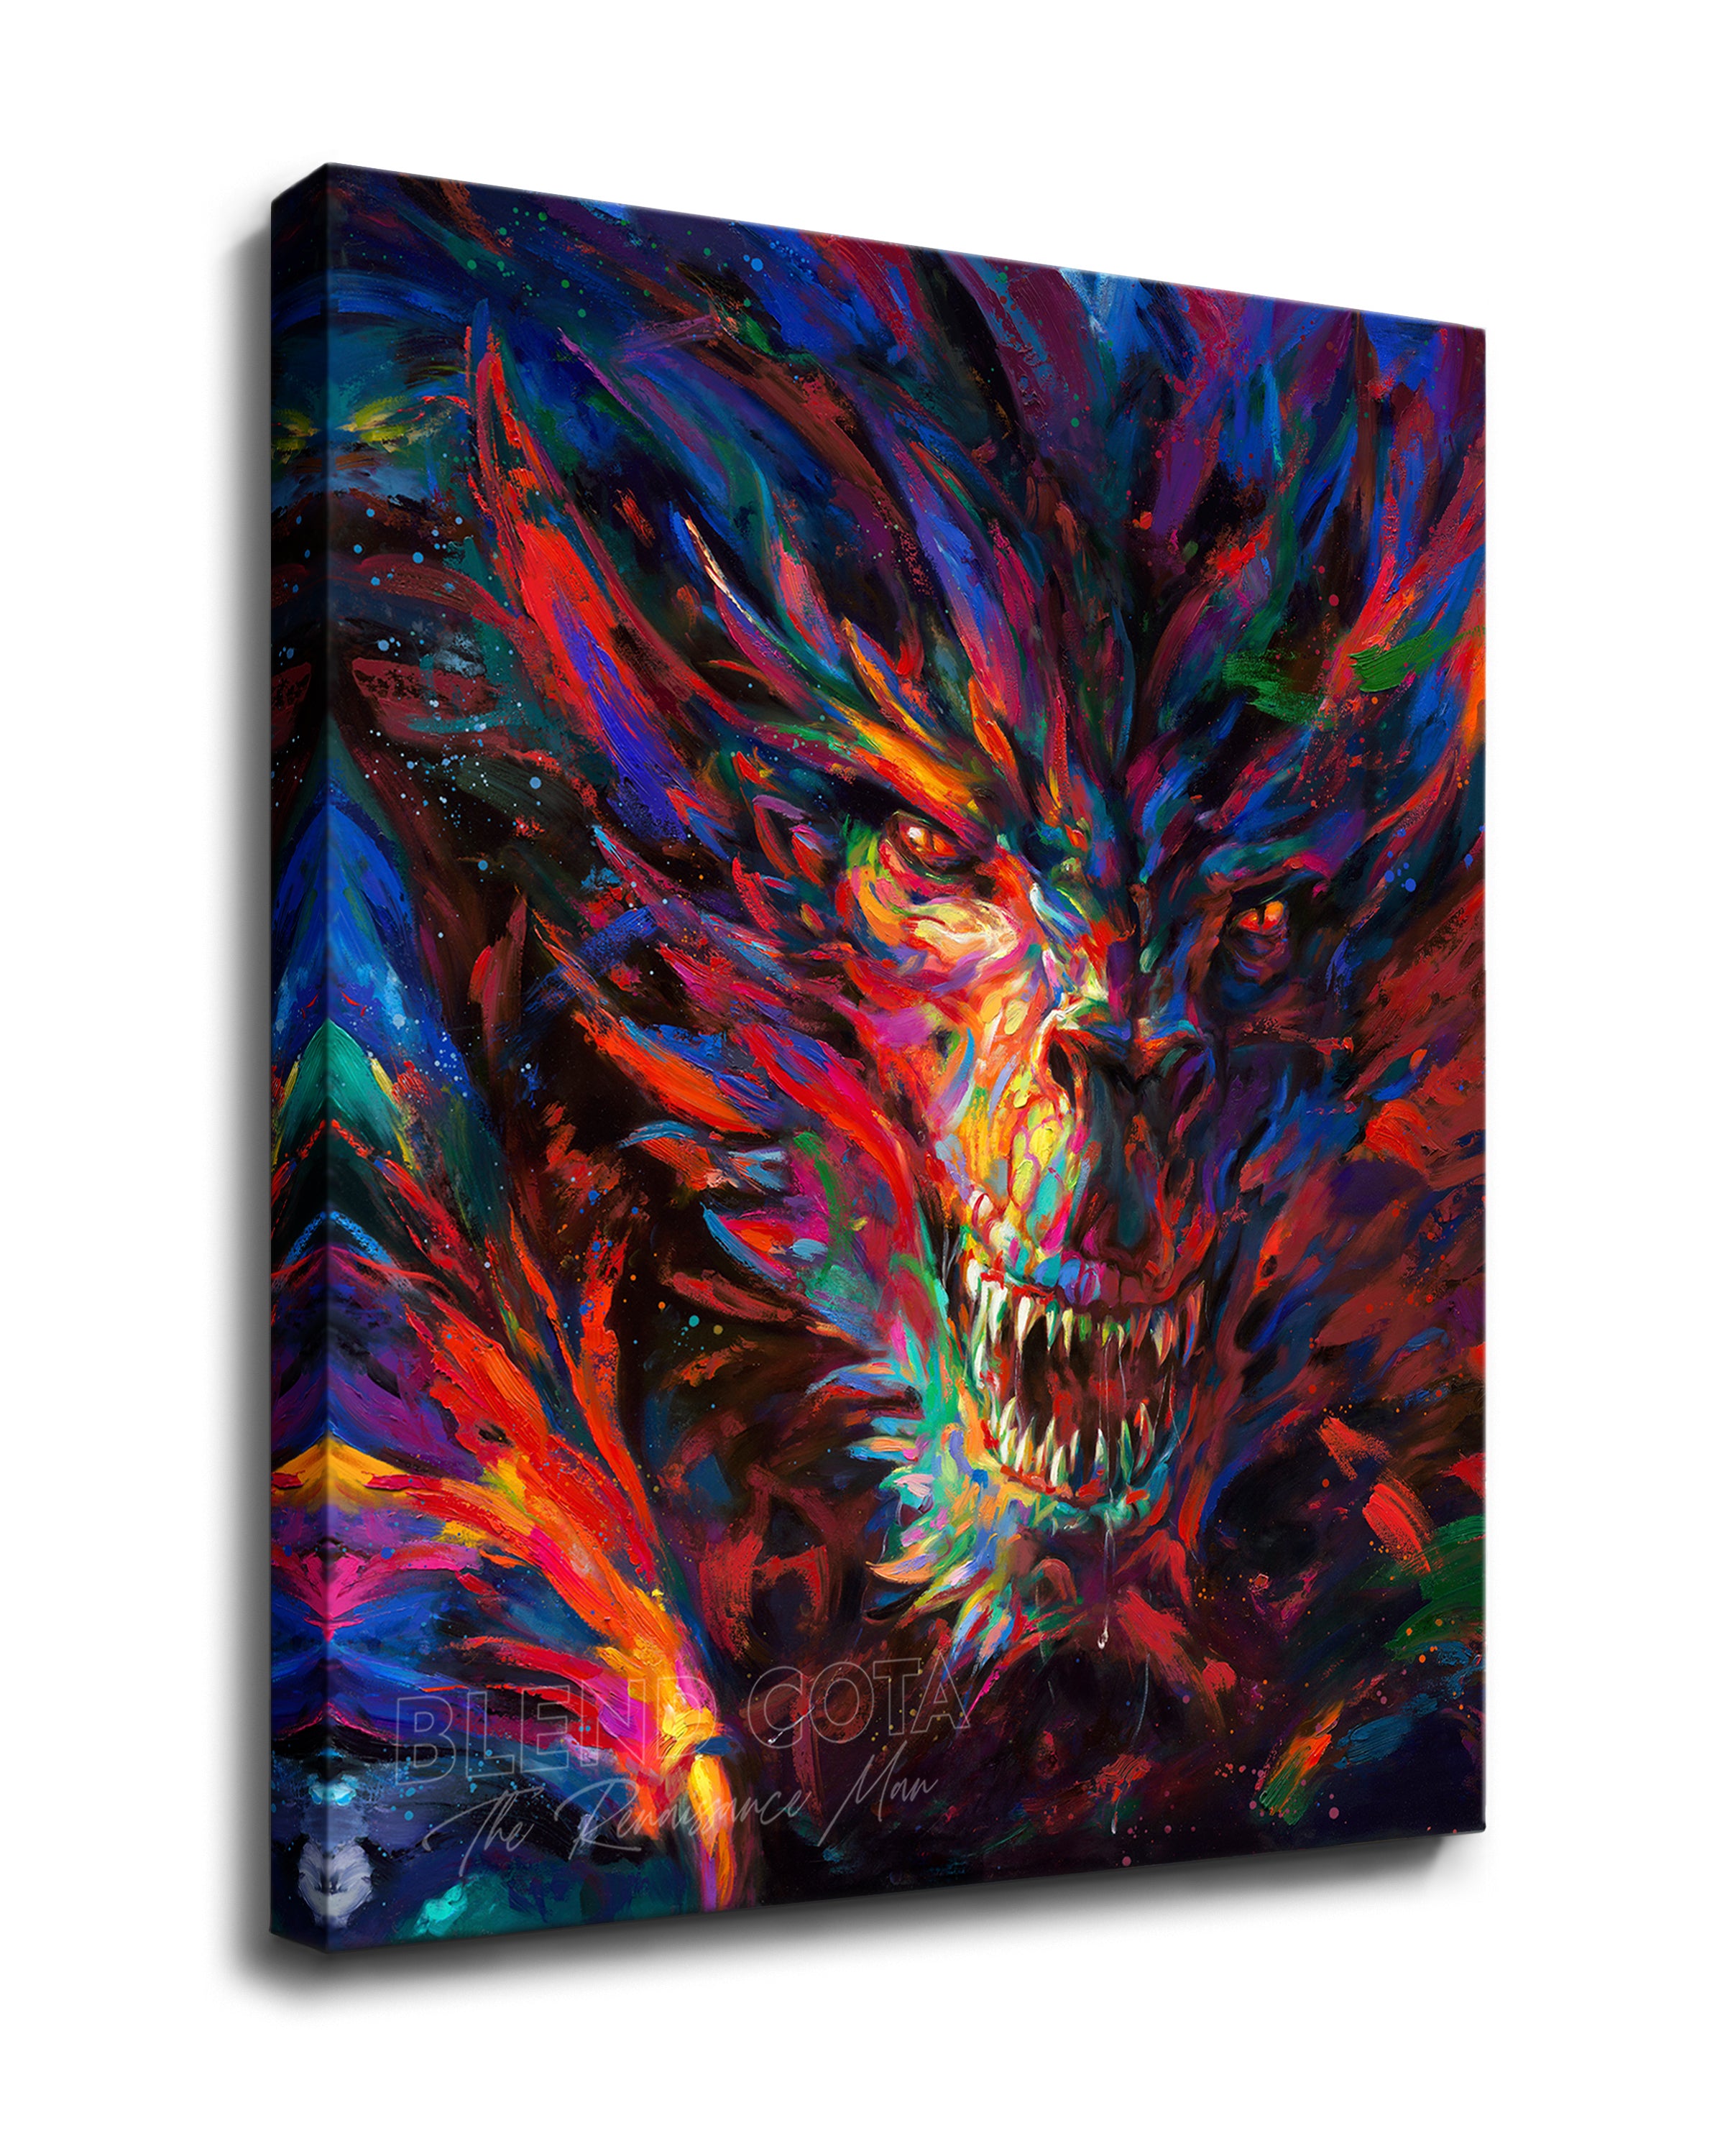 Gallery wrapped art print on canvas of the dragon of war, legendary mythical being engulfed in red and blue flame, emerging from darkness with colorful brushstrokes in an expressionistic style.